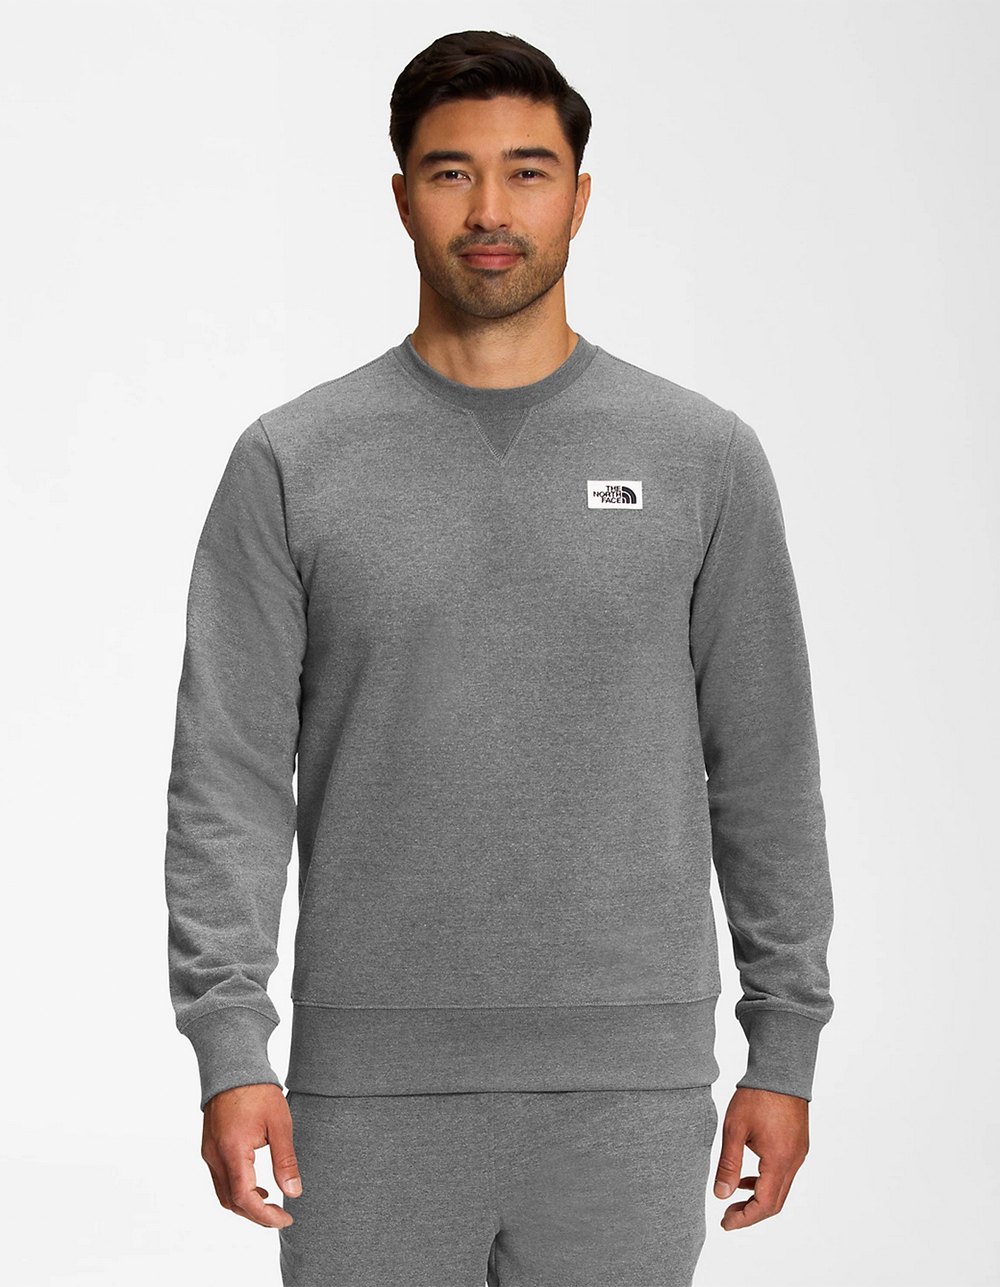 THE NORTH FACE Heritage Patch Mens Crewneck Sweatshirt - GRAY | Tillys